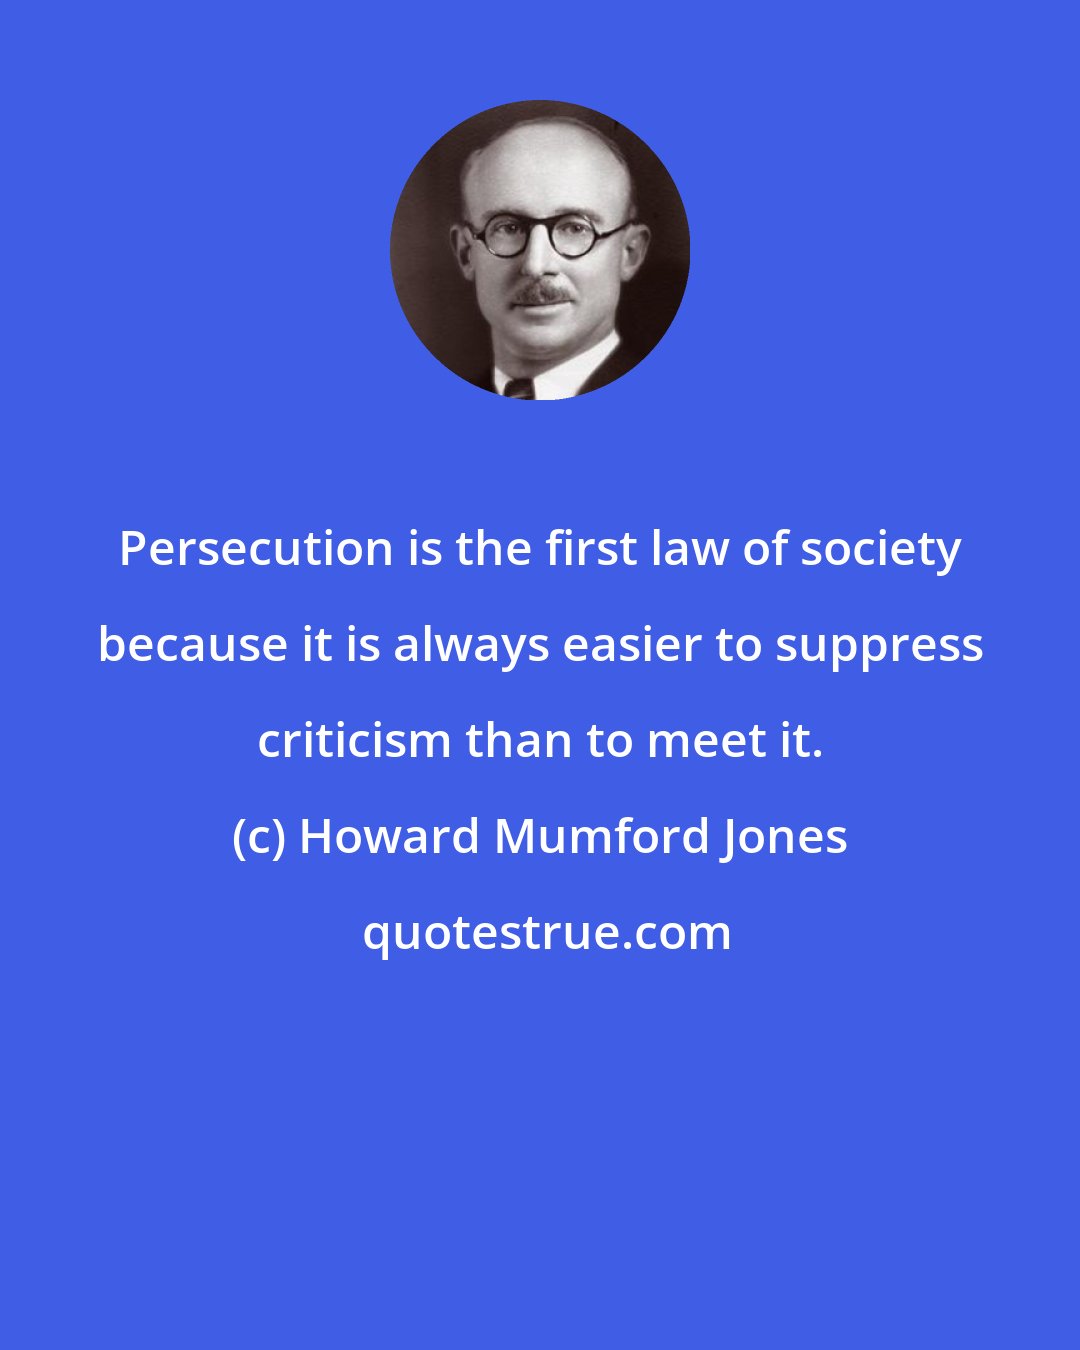 Howard Mumford Jones: Persecution is the first law of society because it is always easier to suppress criticism than to meet it.